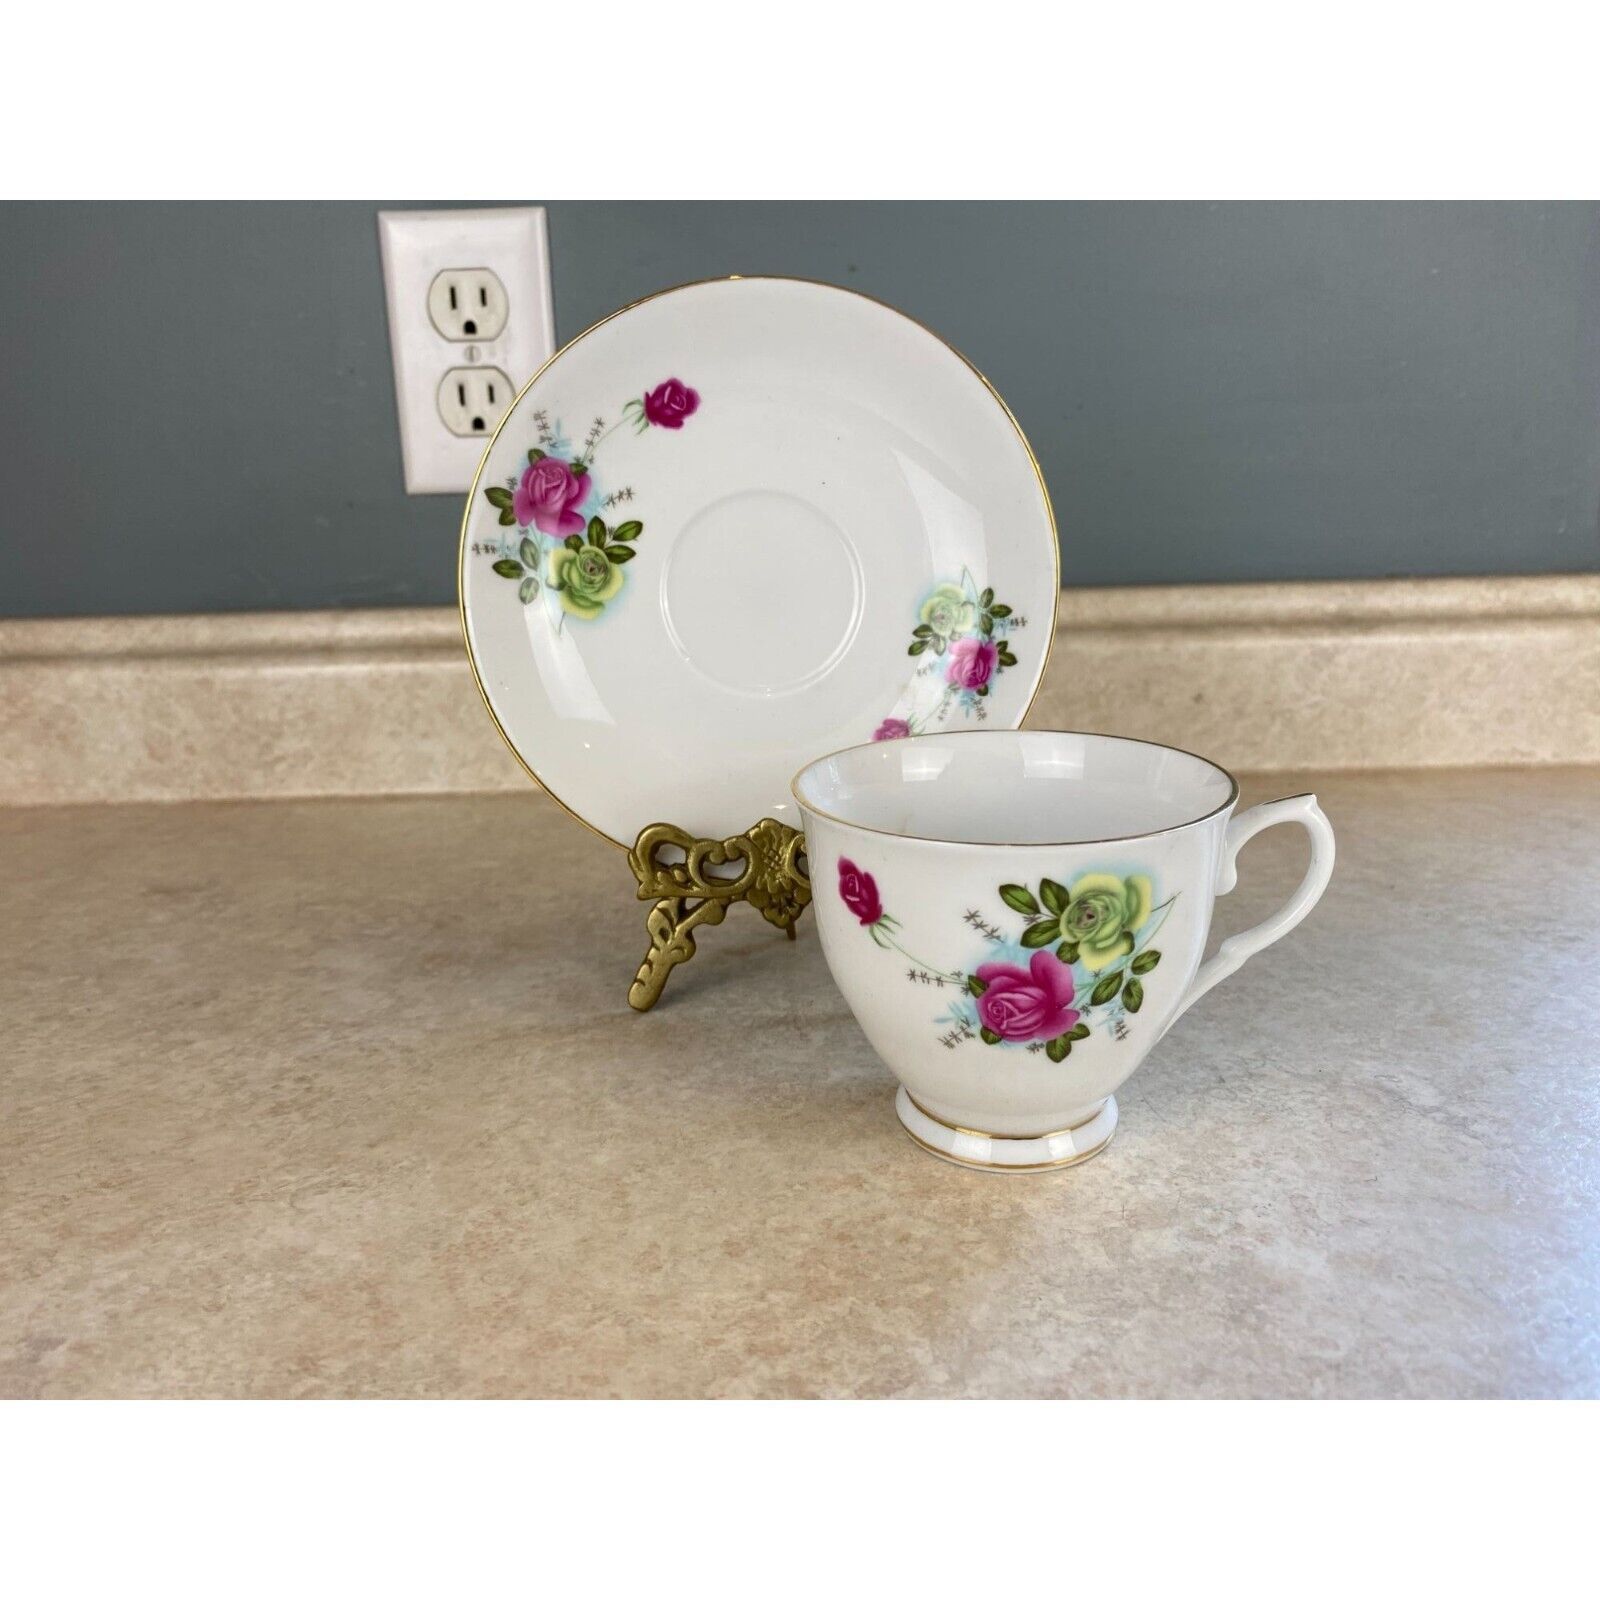 Primary image for China Screw Pink And Yellow Rose Tea Cup And Saucer Set